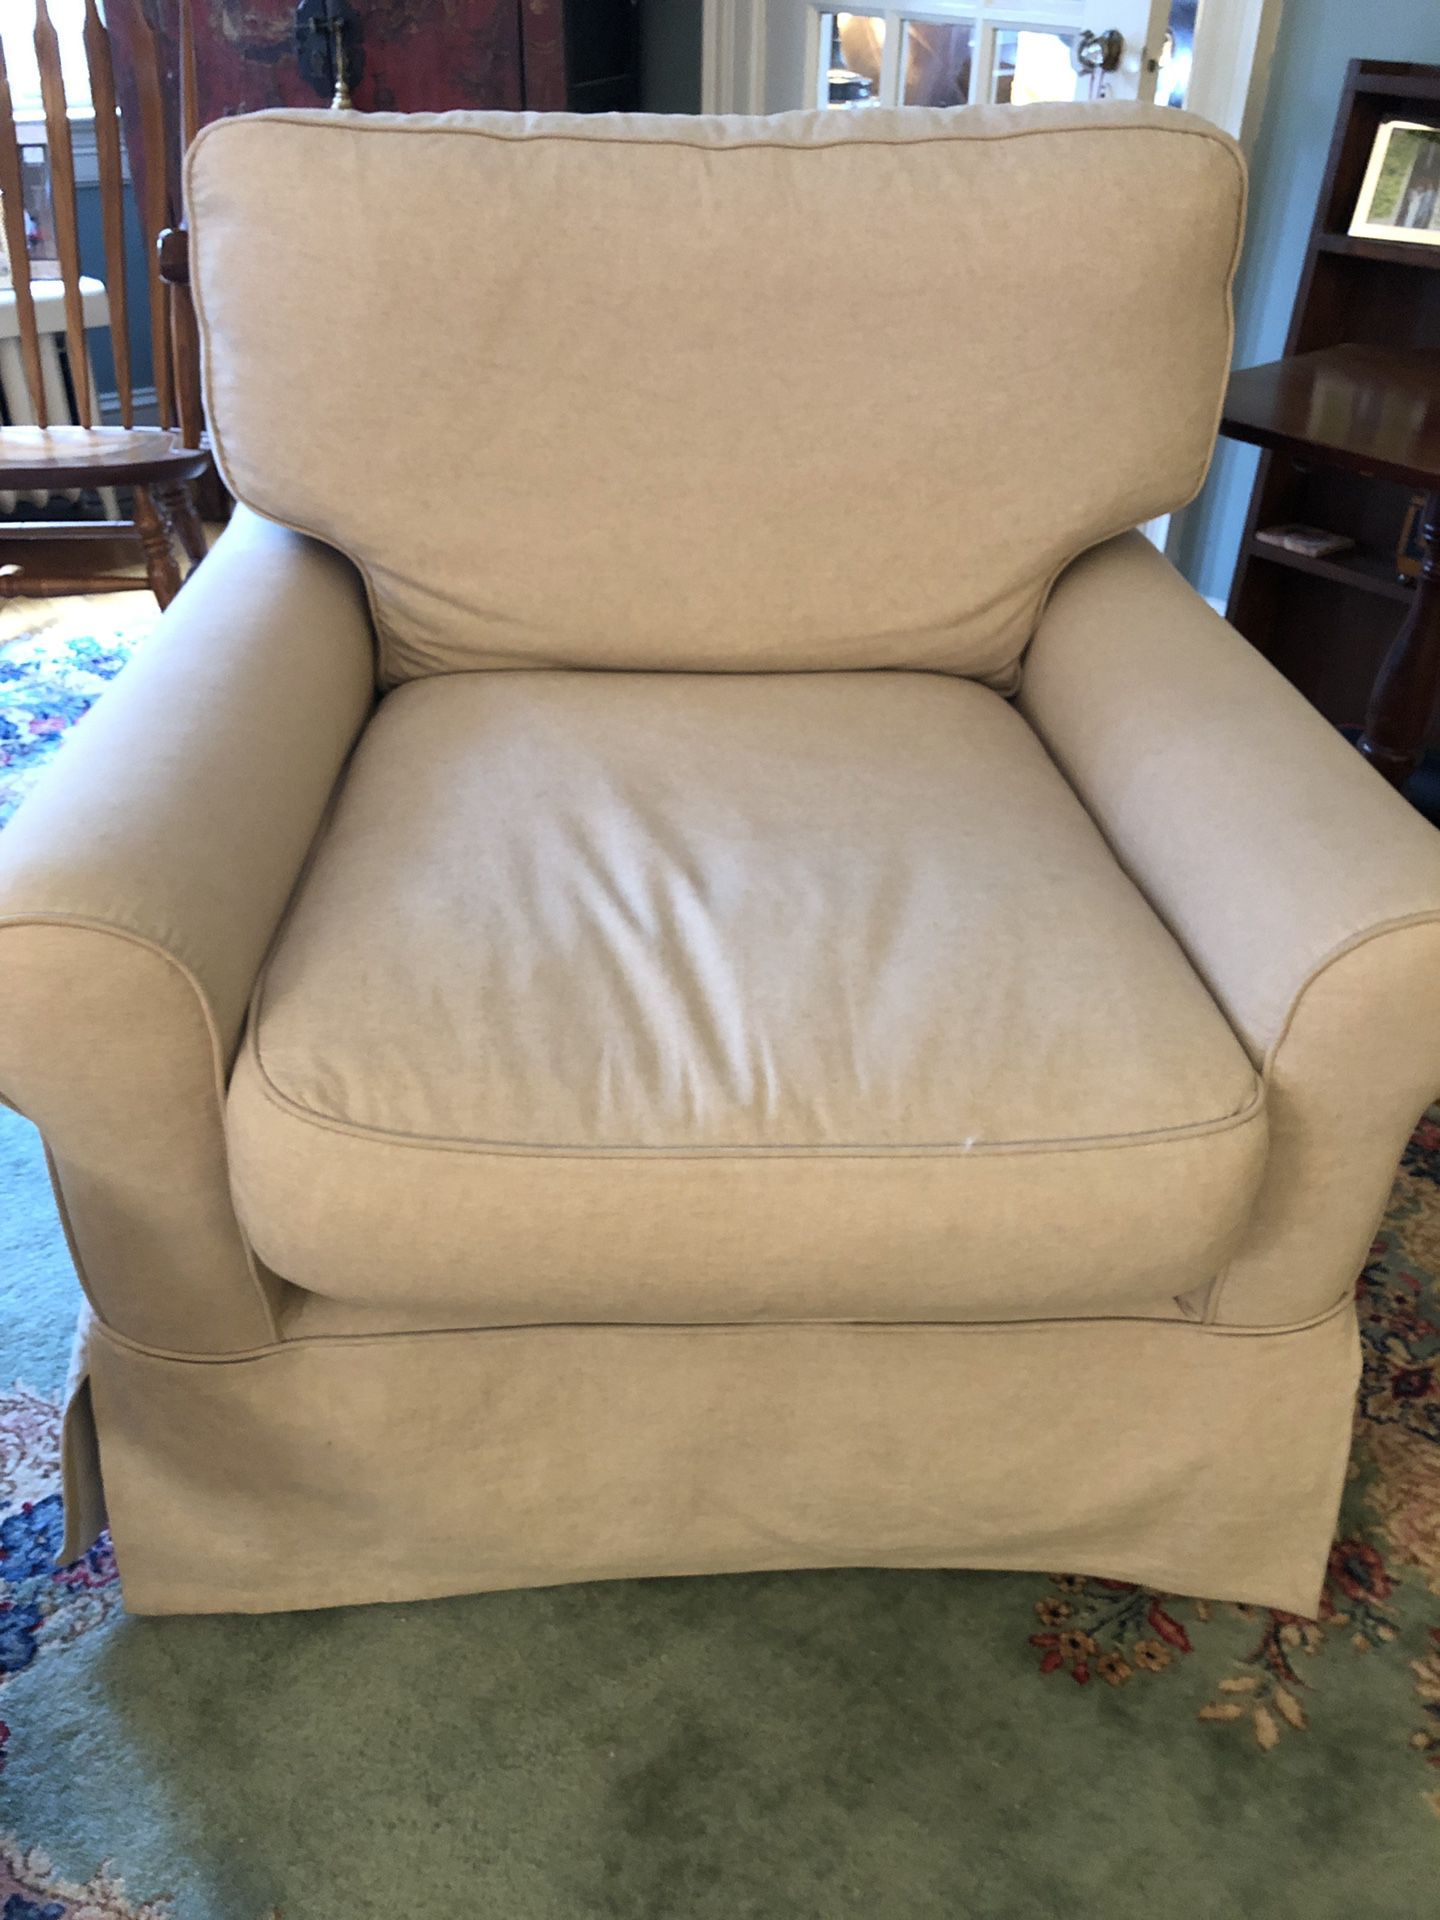 2 swivel chairs: GREAT condition $55 each or both for $100